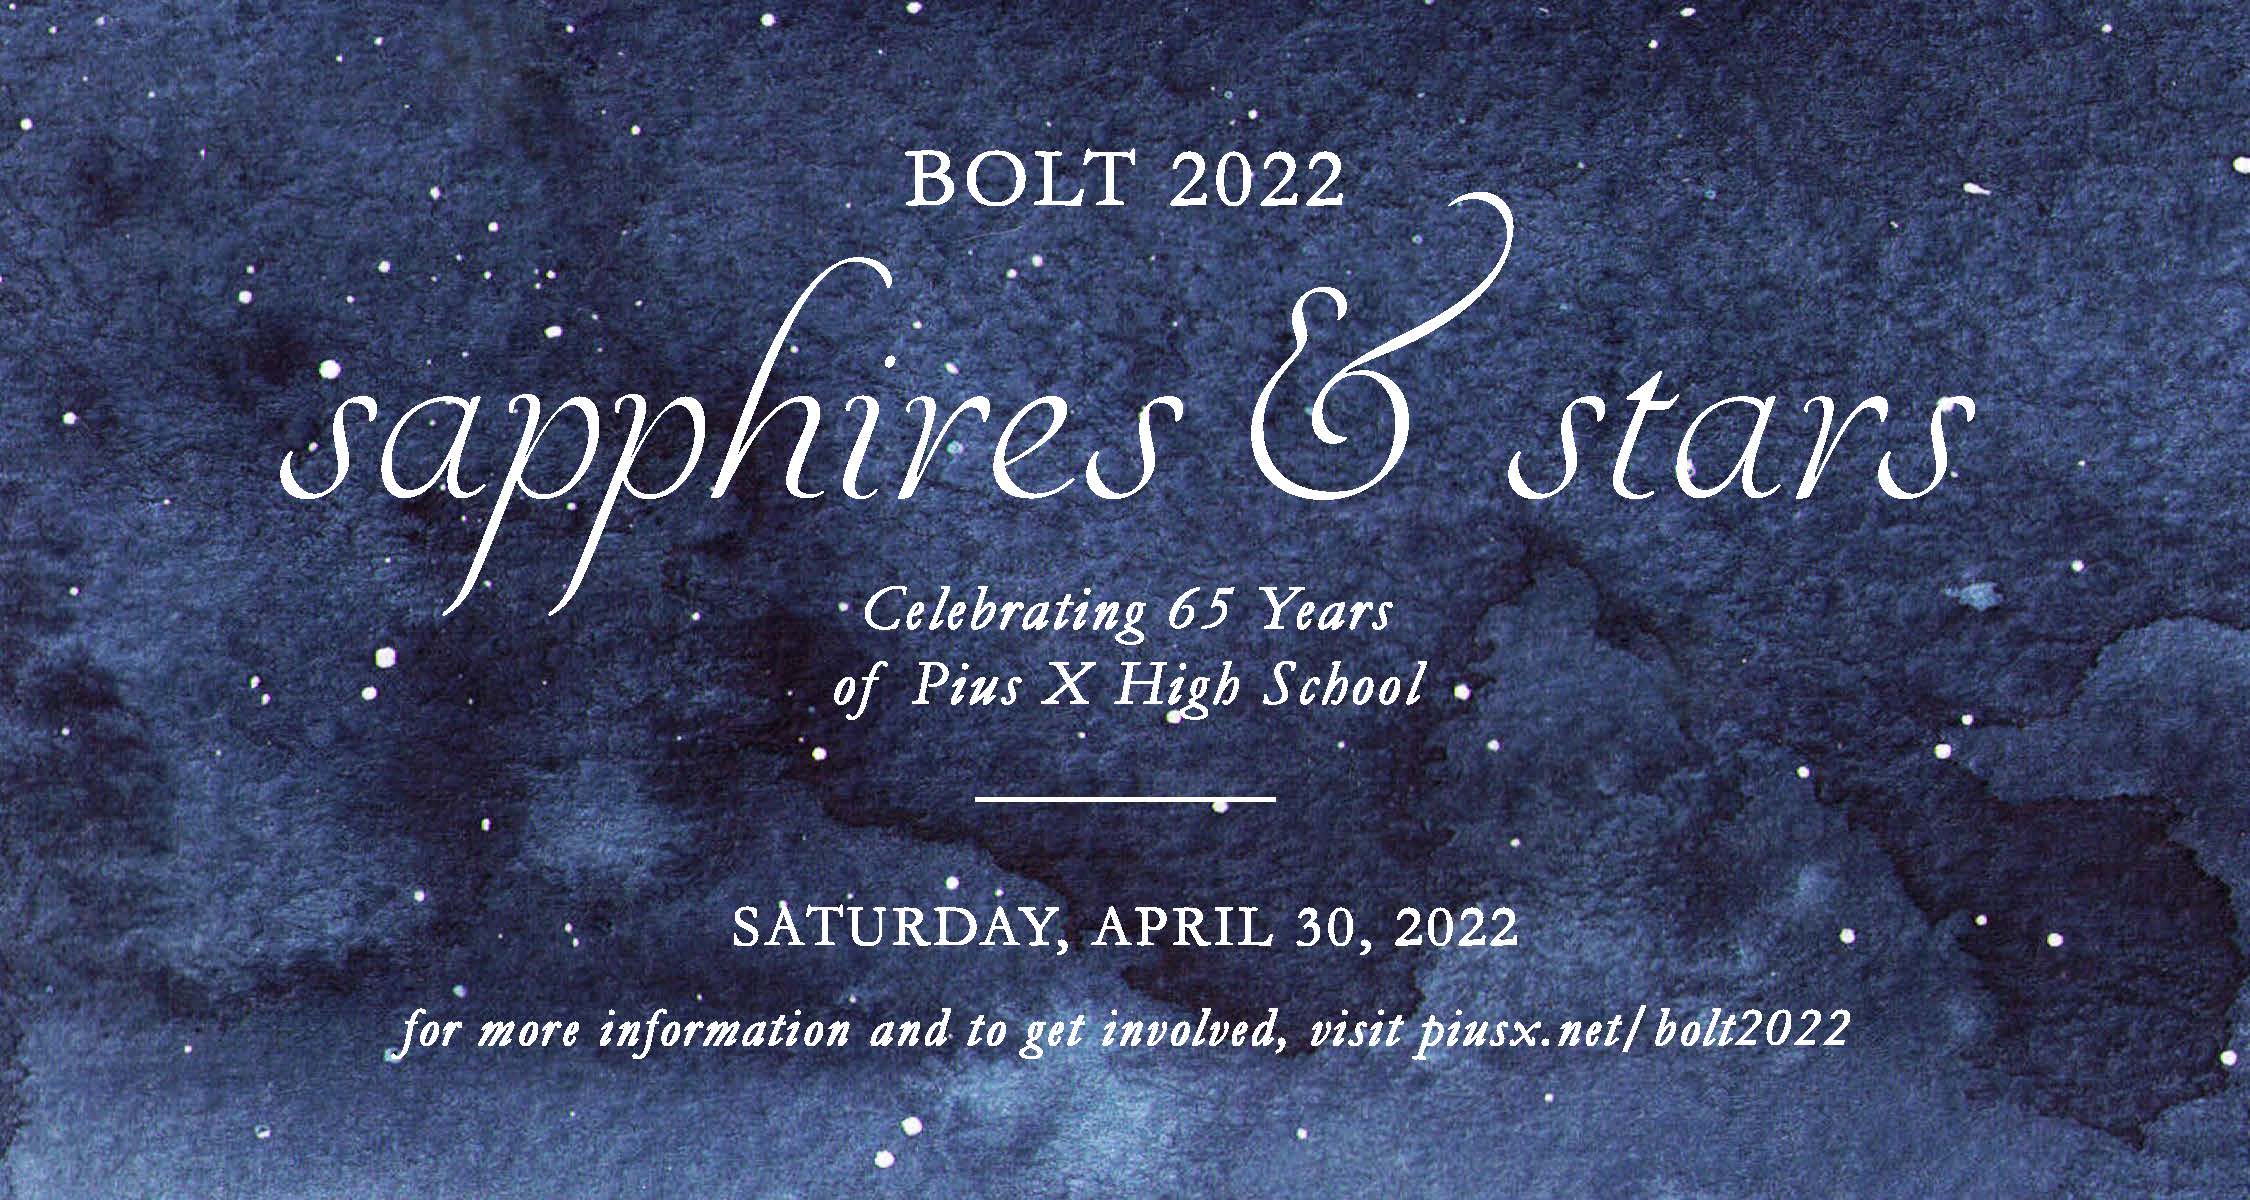 BOLT 2022 - Sapphires and Stars